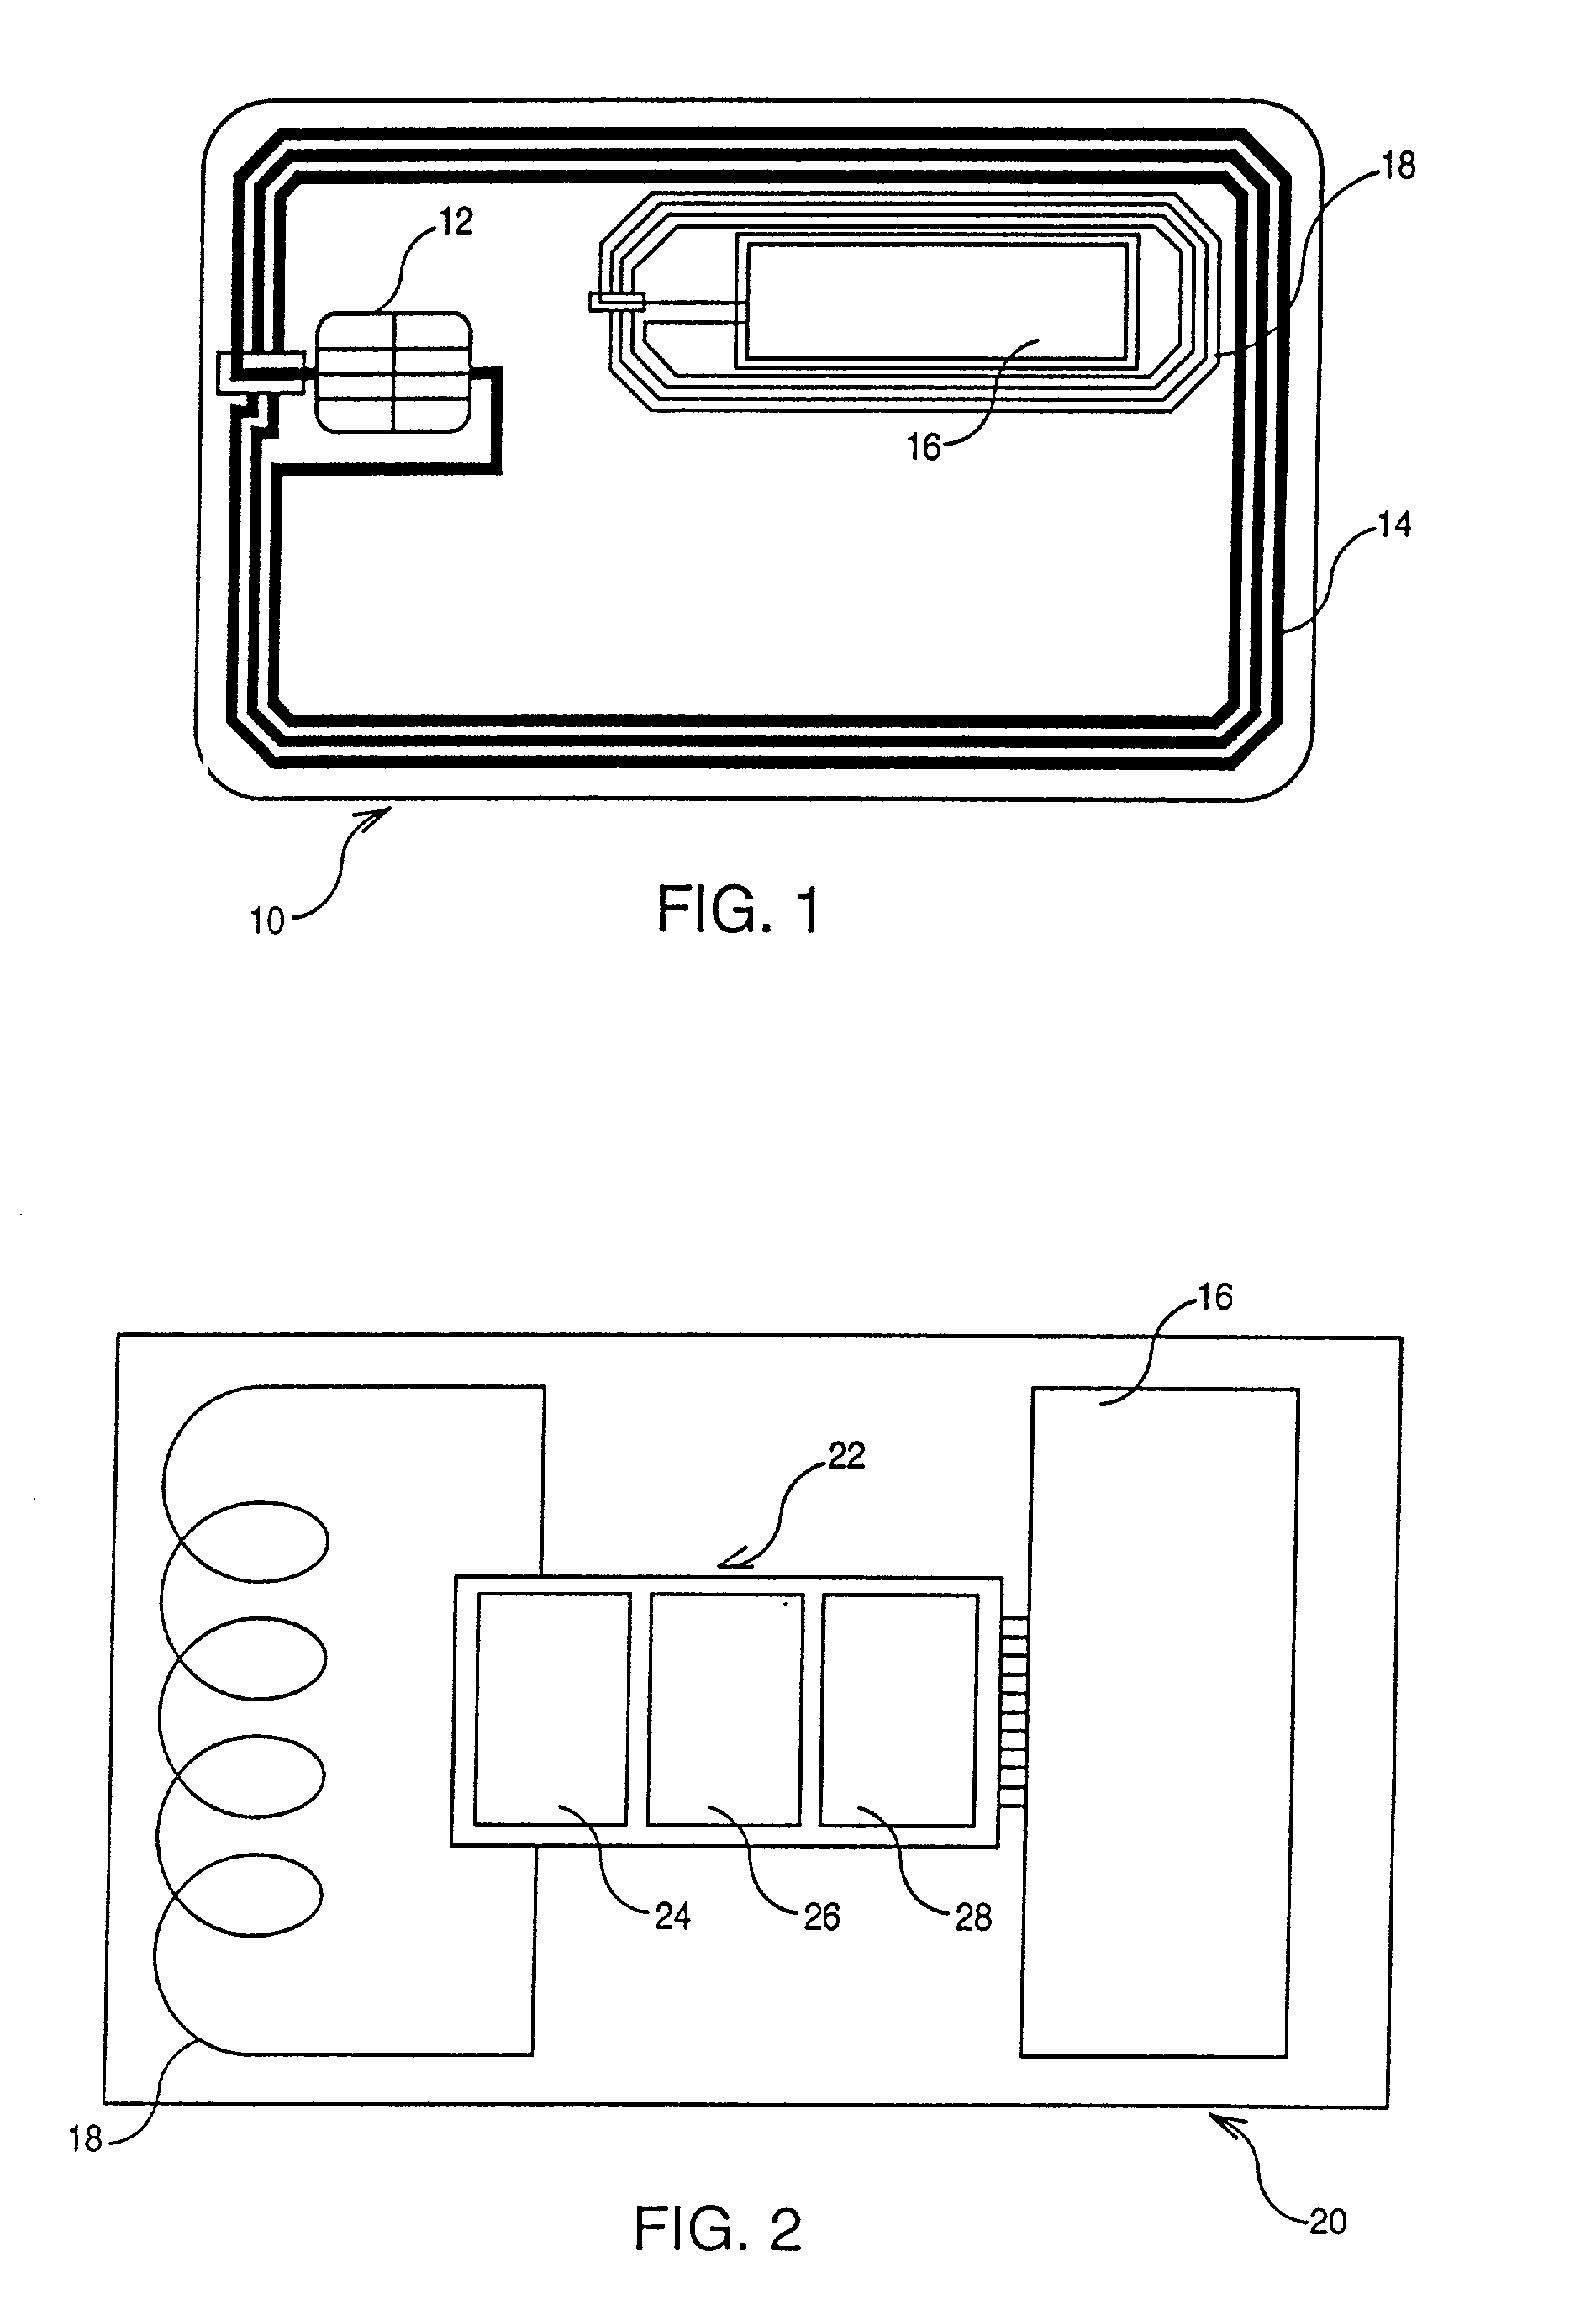 Contact-free display peripheral device for contact-free portable object